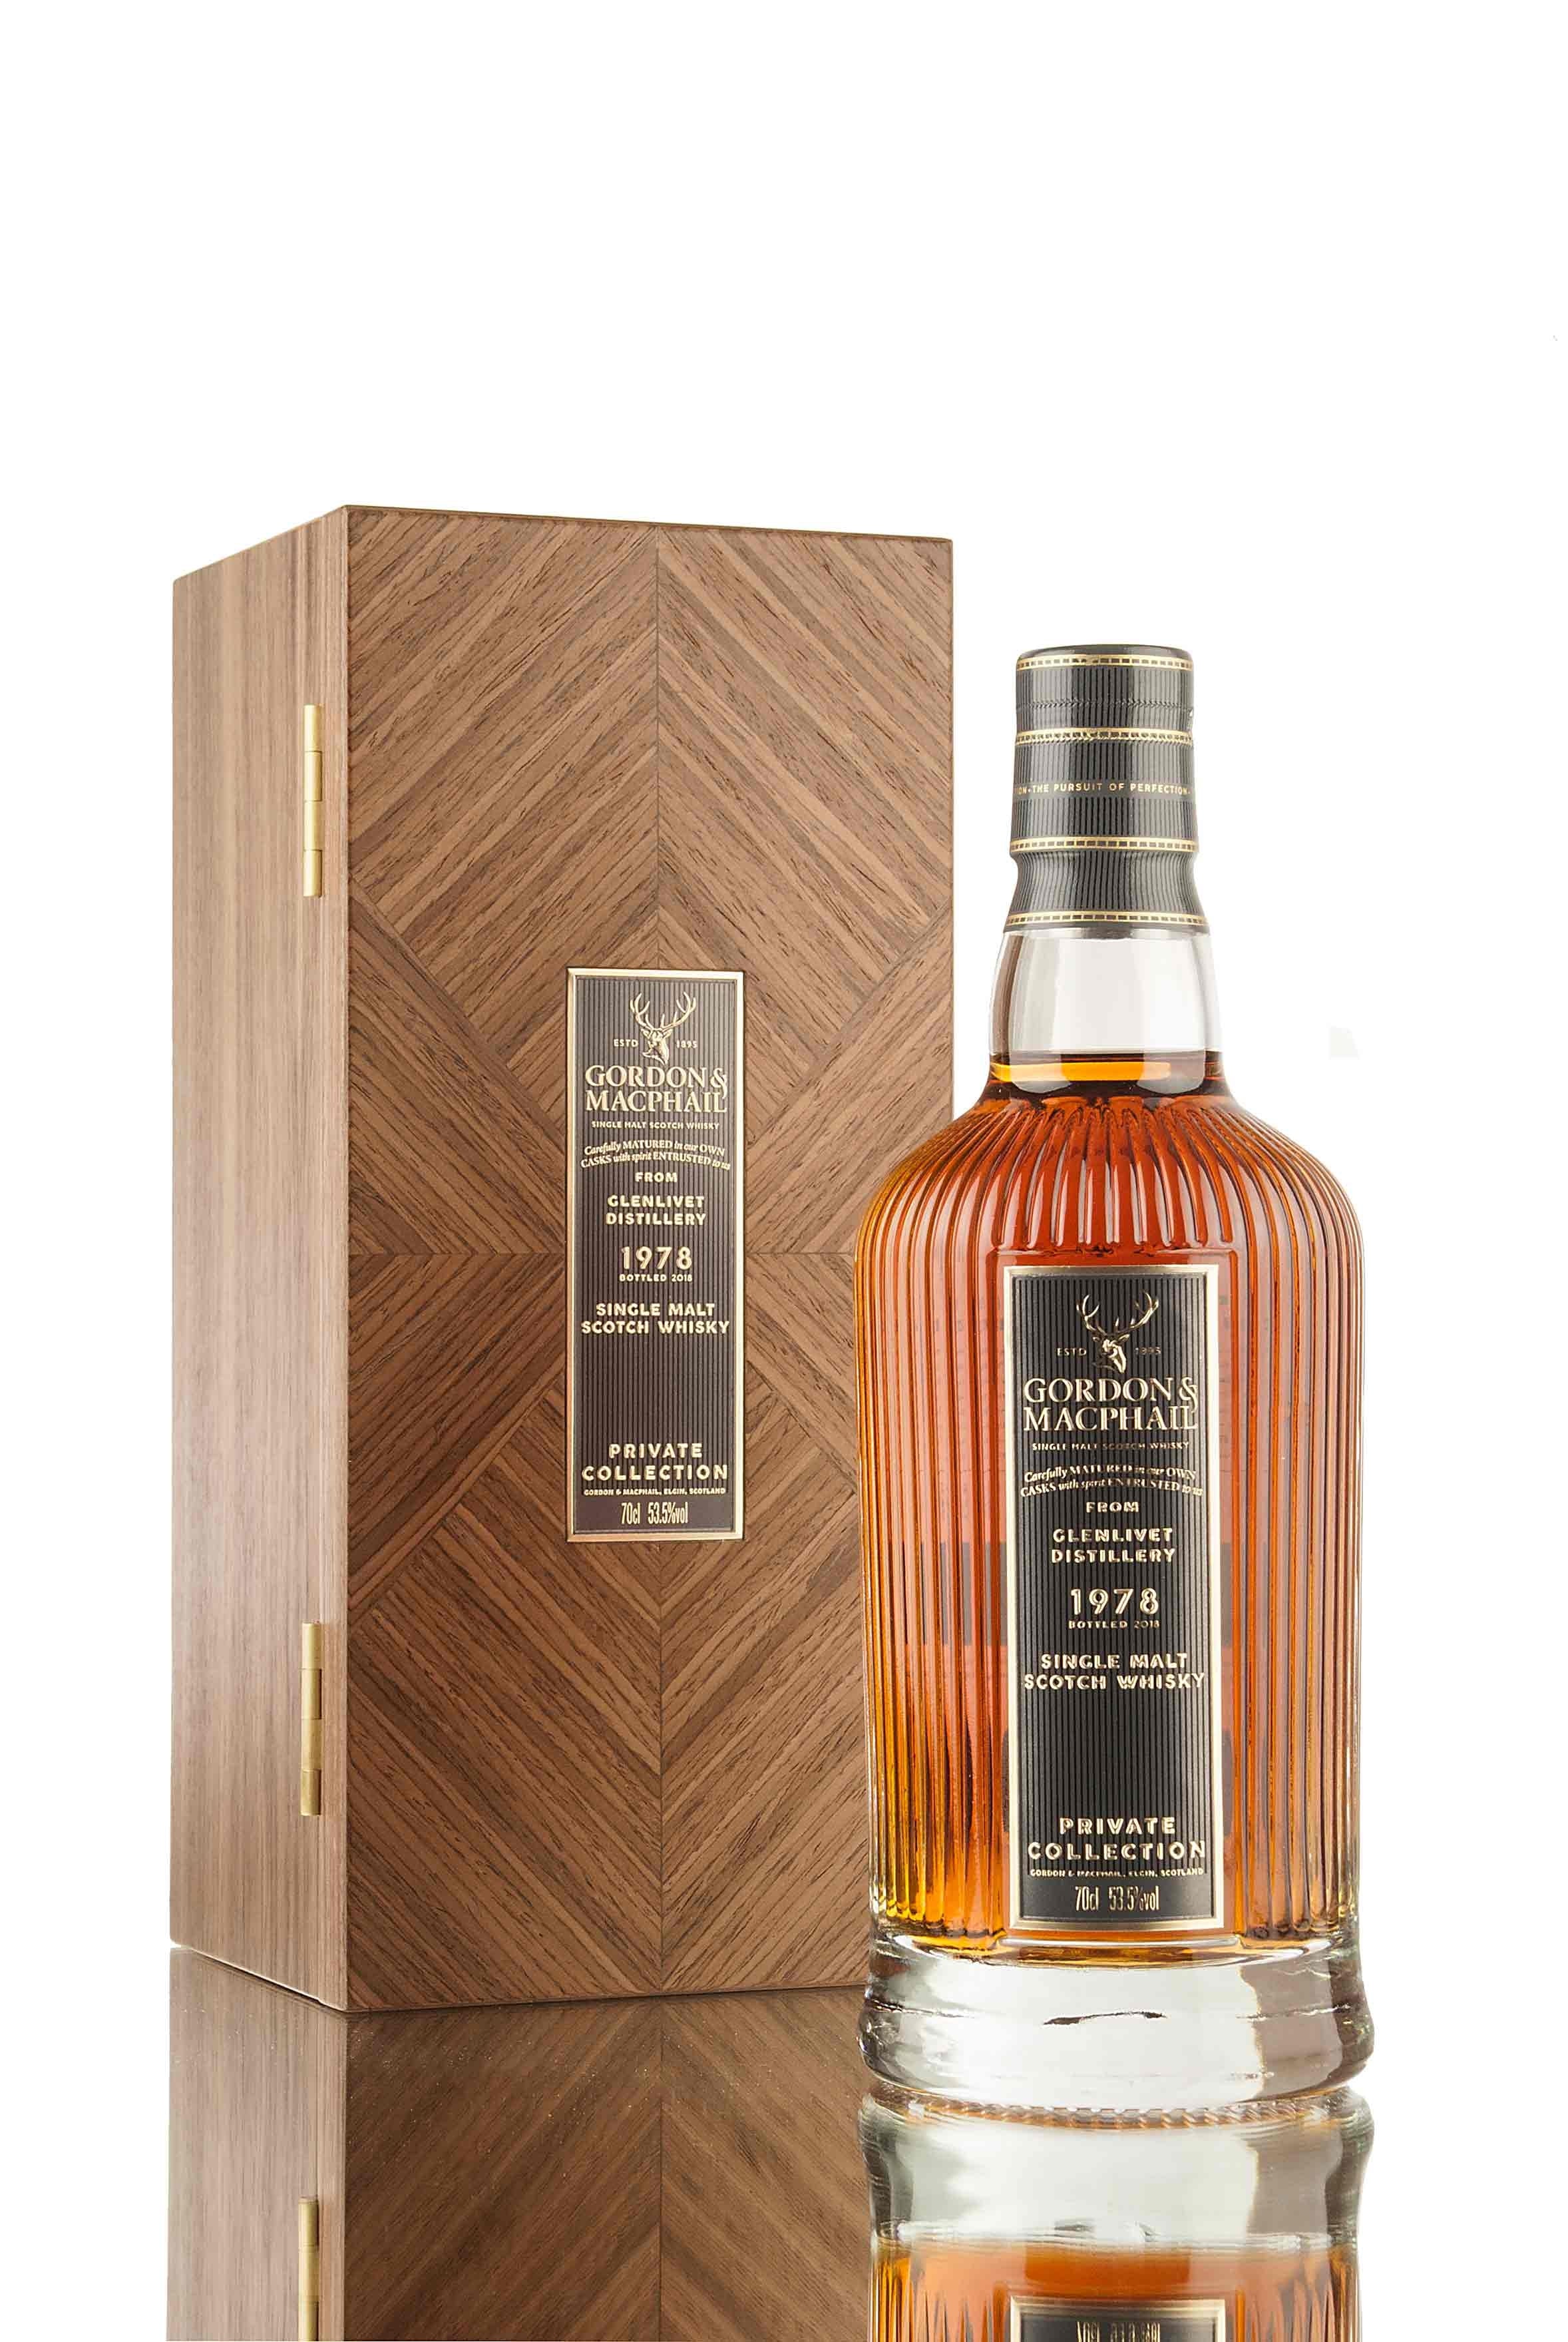 Glenlivet 40 Year Old - 1978 | Private Collection (G&M)